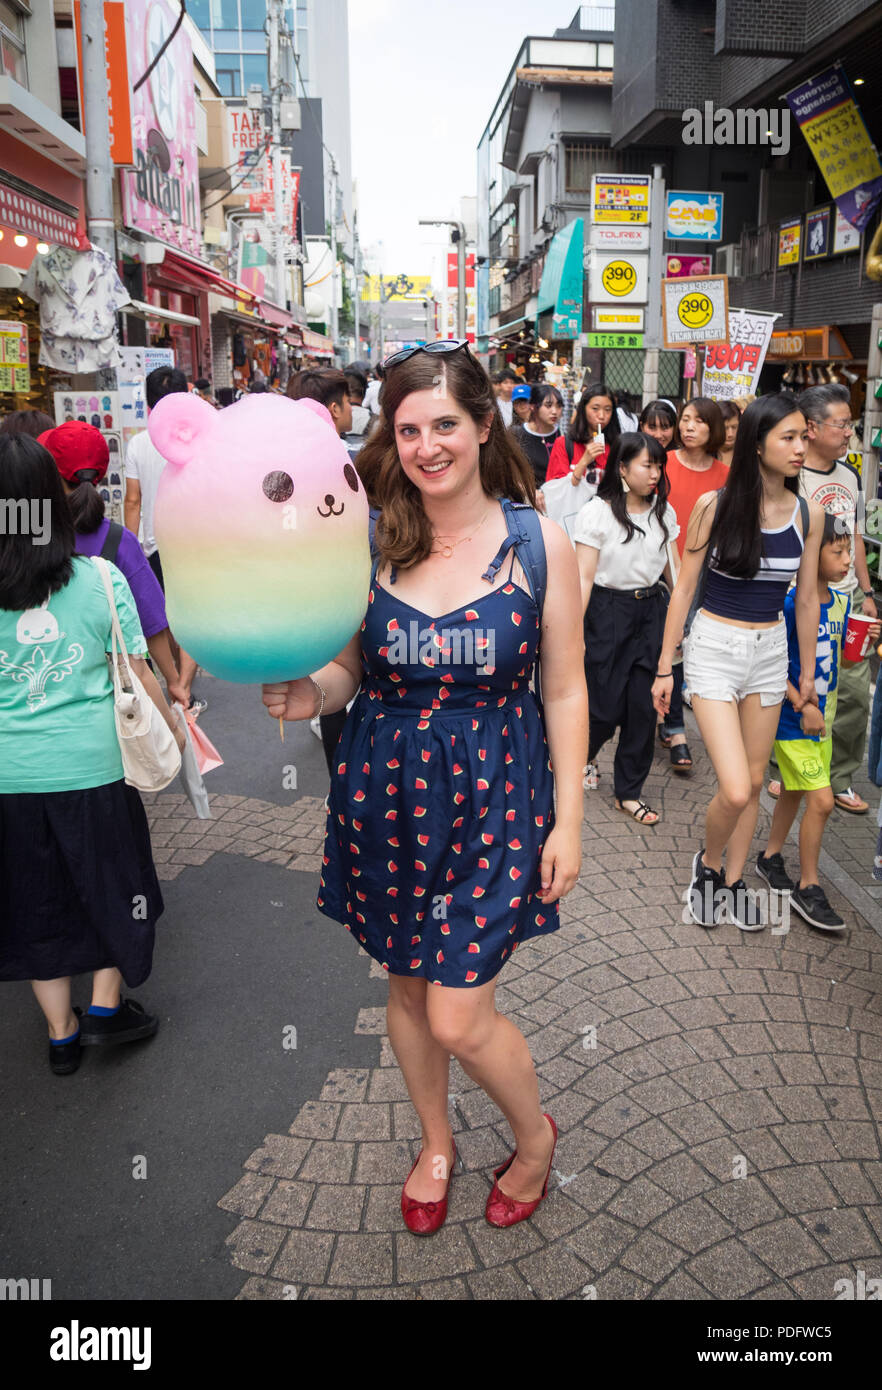 A woman with cotton candy in a shape of a bear on Takeshita Street in Harajuku, Tokyo, Japan. Stock Photo